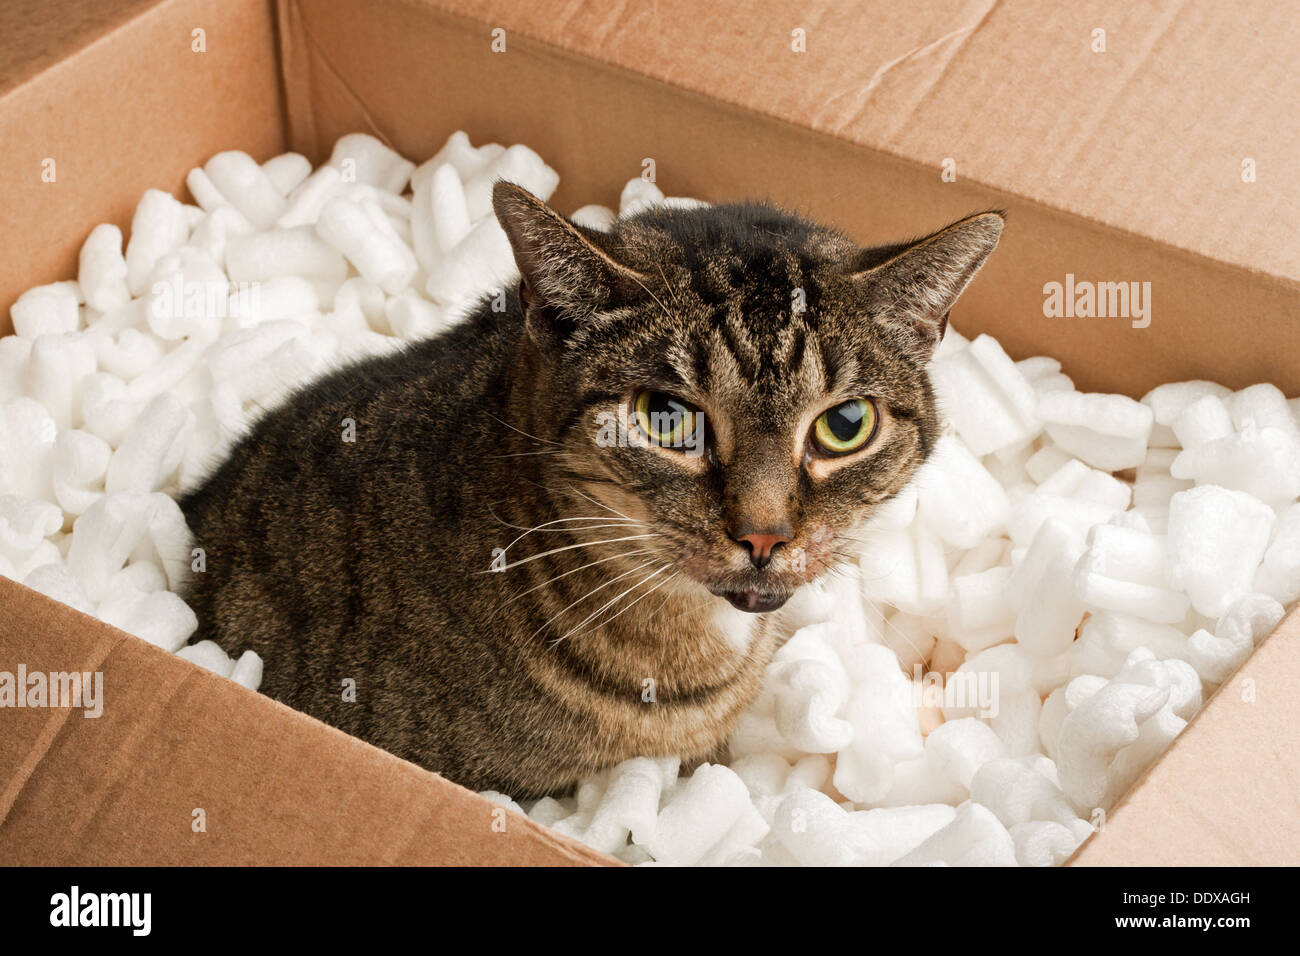 Annoyed cat in cardboard box of packing peanuts Stock Photo